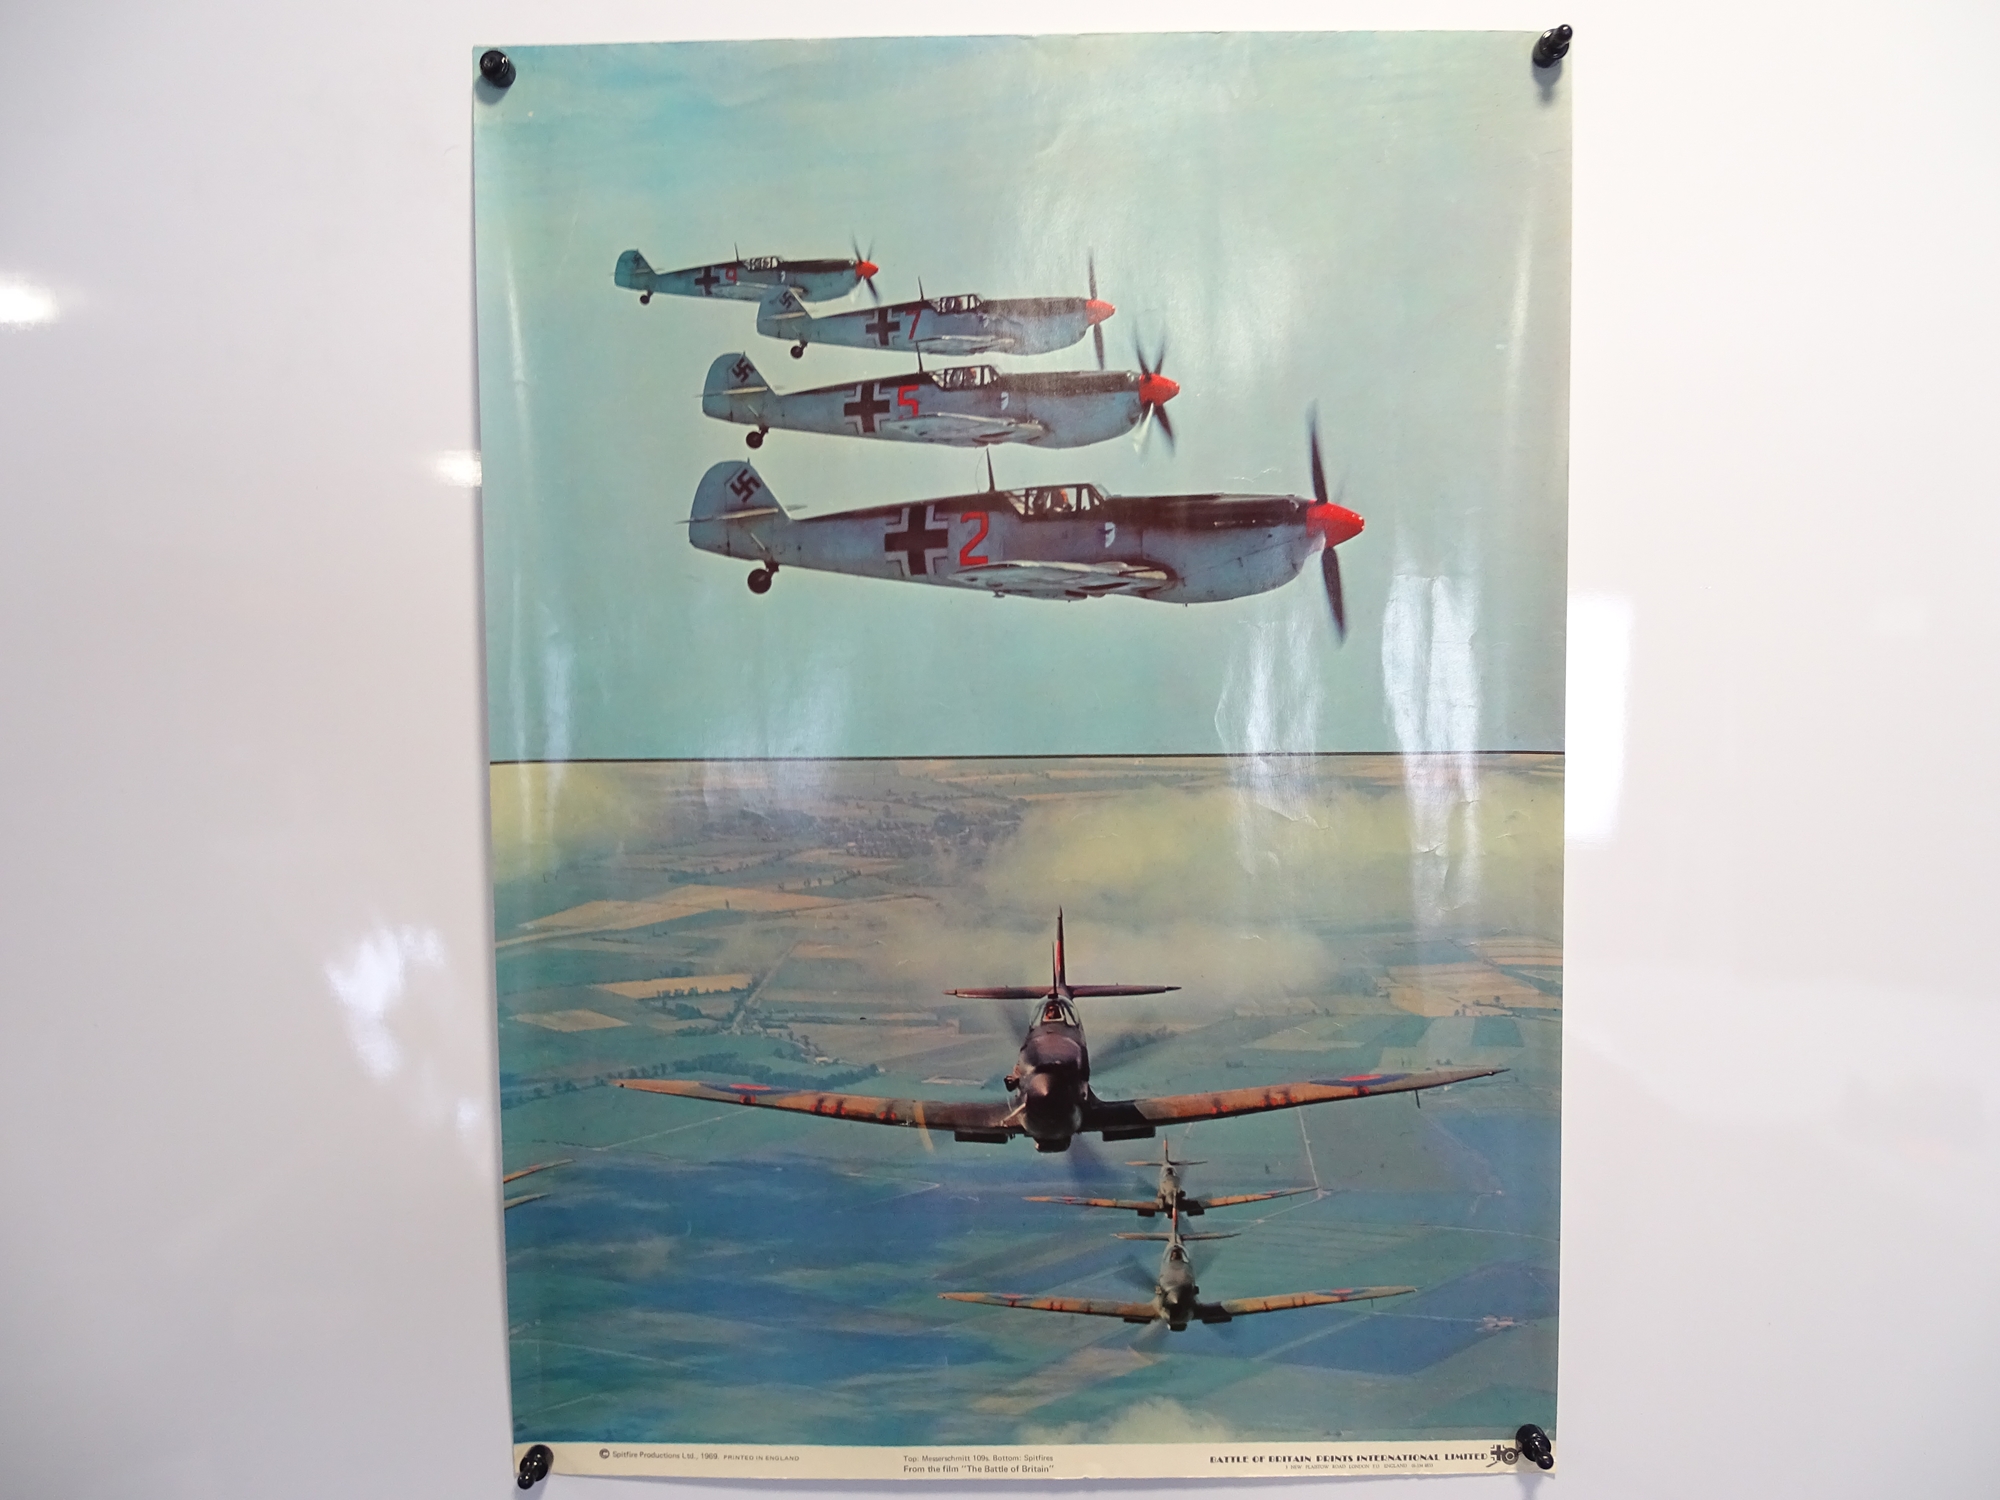 BATTLE OF BRITAIN (1969) - A group of commercial over sized, good quality colour prints of the - Image 5 of 7